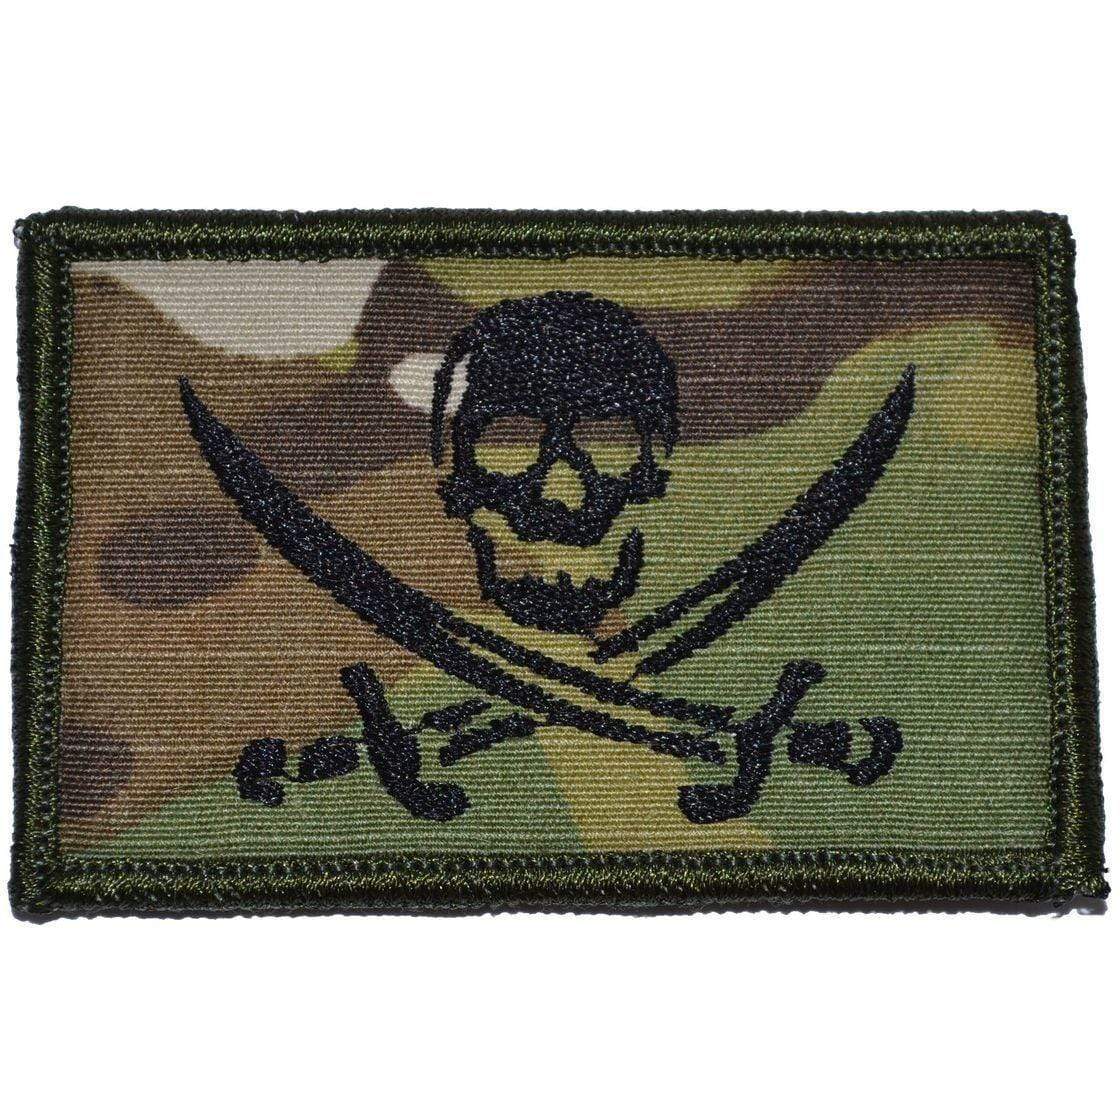 Pirate Jolly Roger - 2x3 Patch